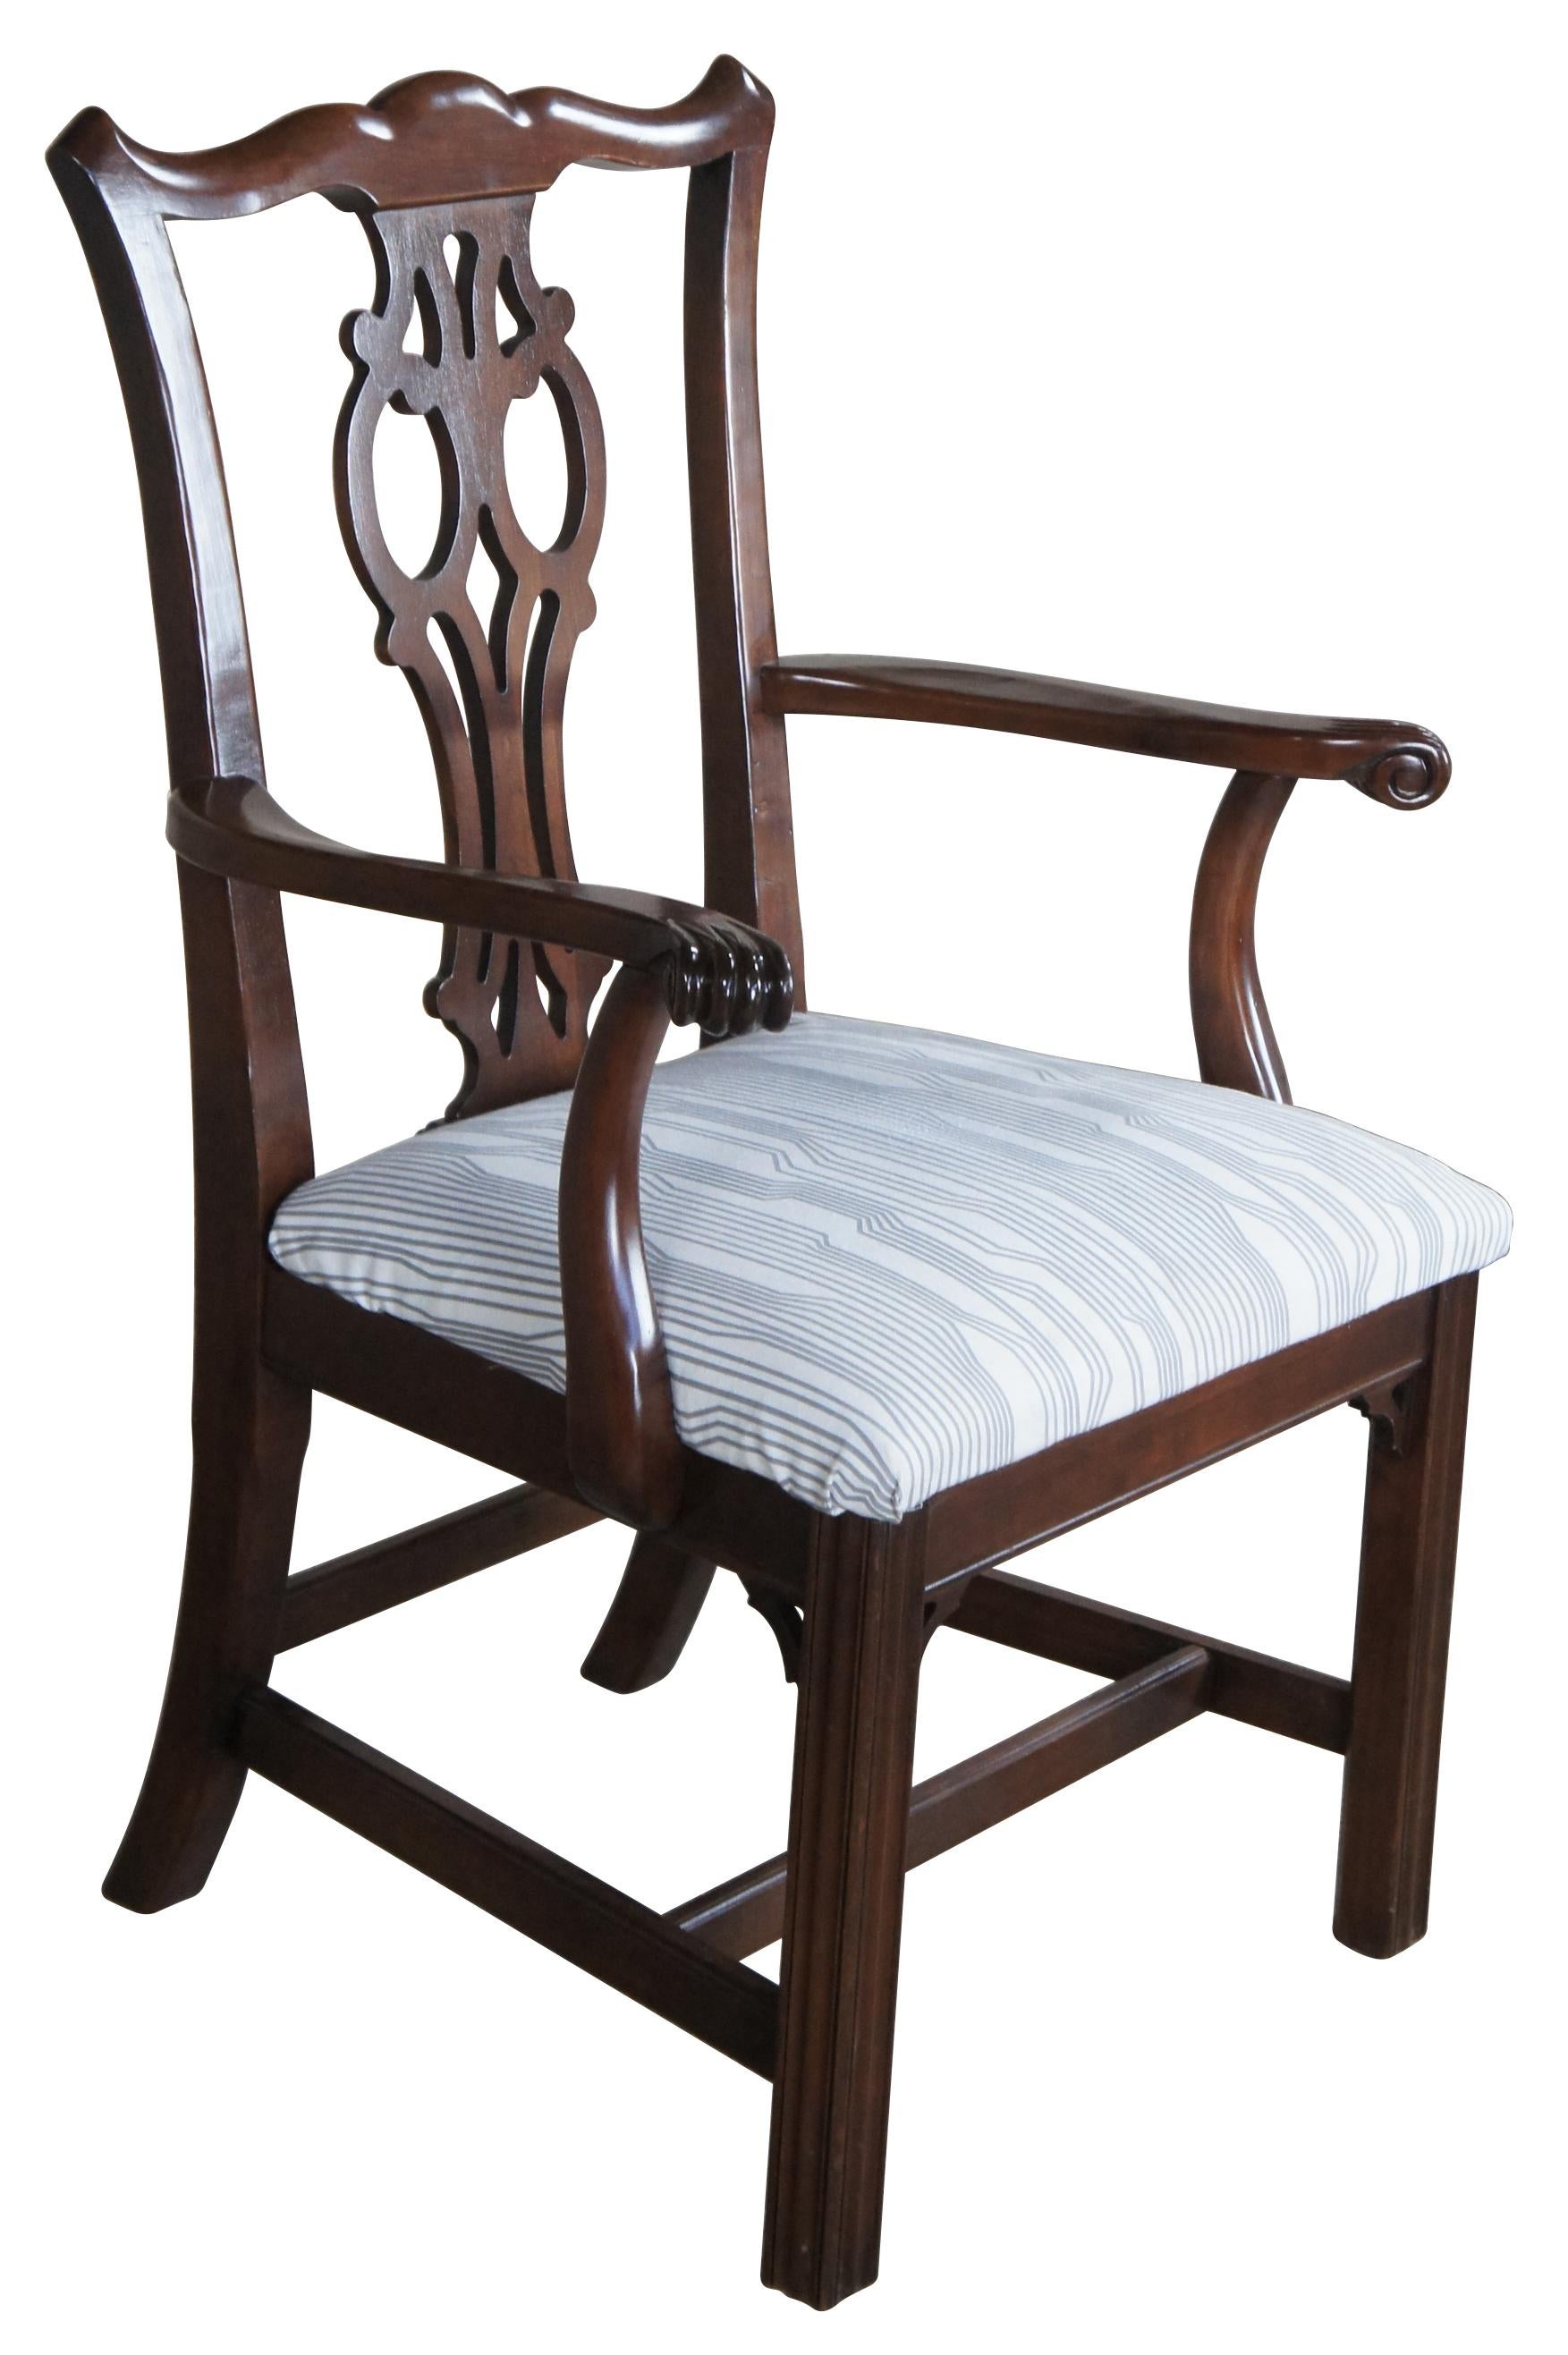 Ethan Allen Splat Back Chippendale chair, 11-6060A. Part of the Georgian Court Collection. Made from cherry with a serpentine crest rail over pierced splat back and contoured arms. The chair is supported by straight legs with fluted accents. Seat is